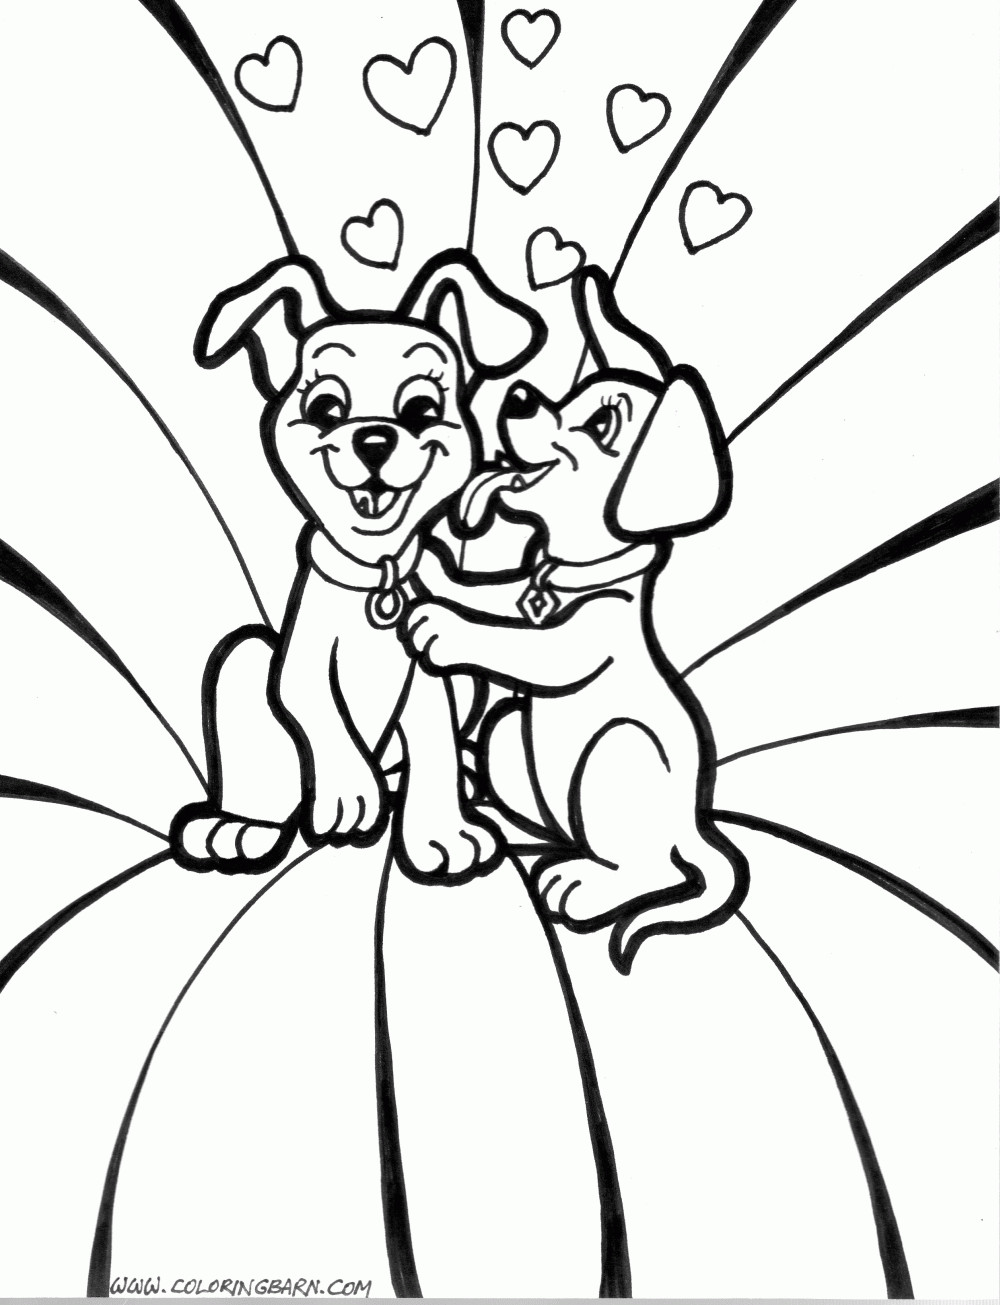 Boyfriend And Girlfriend Coloring Pages
 Boyfriend And Girlfriend And Love Coloring Pages